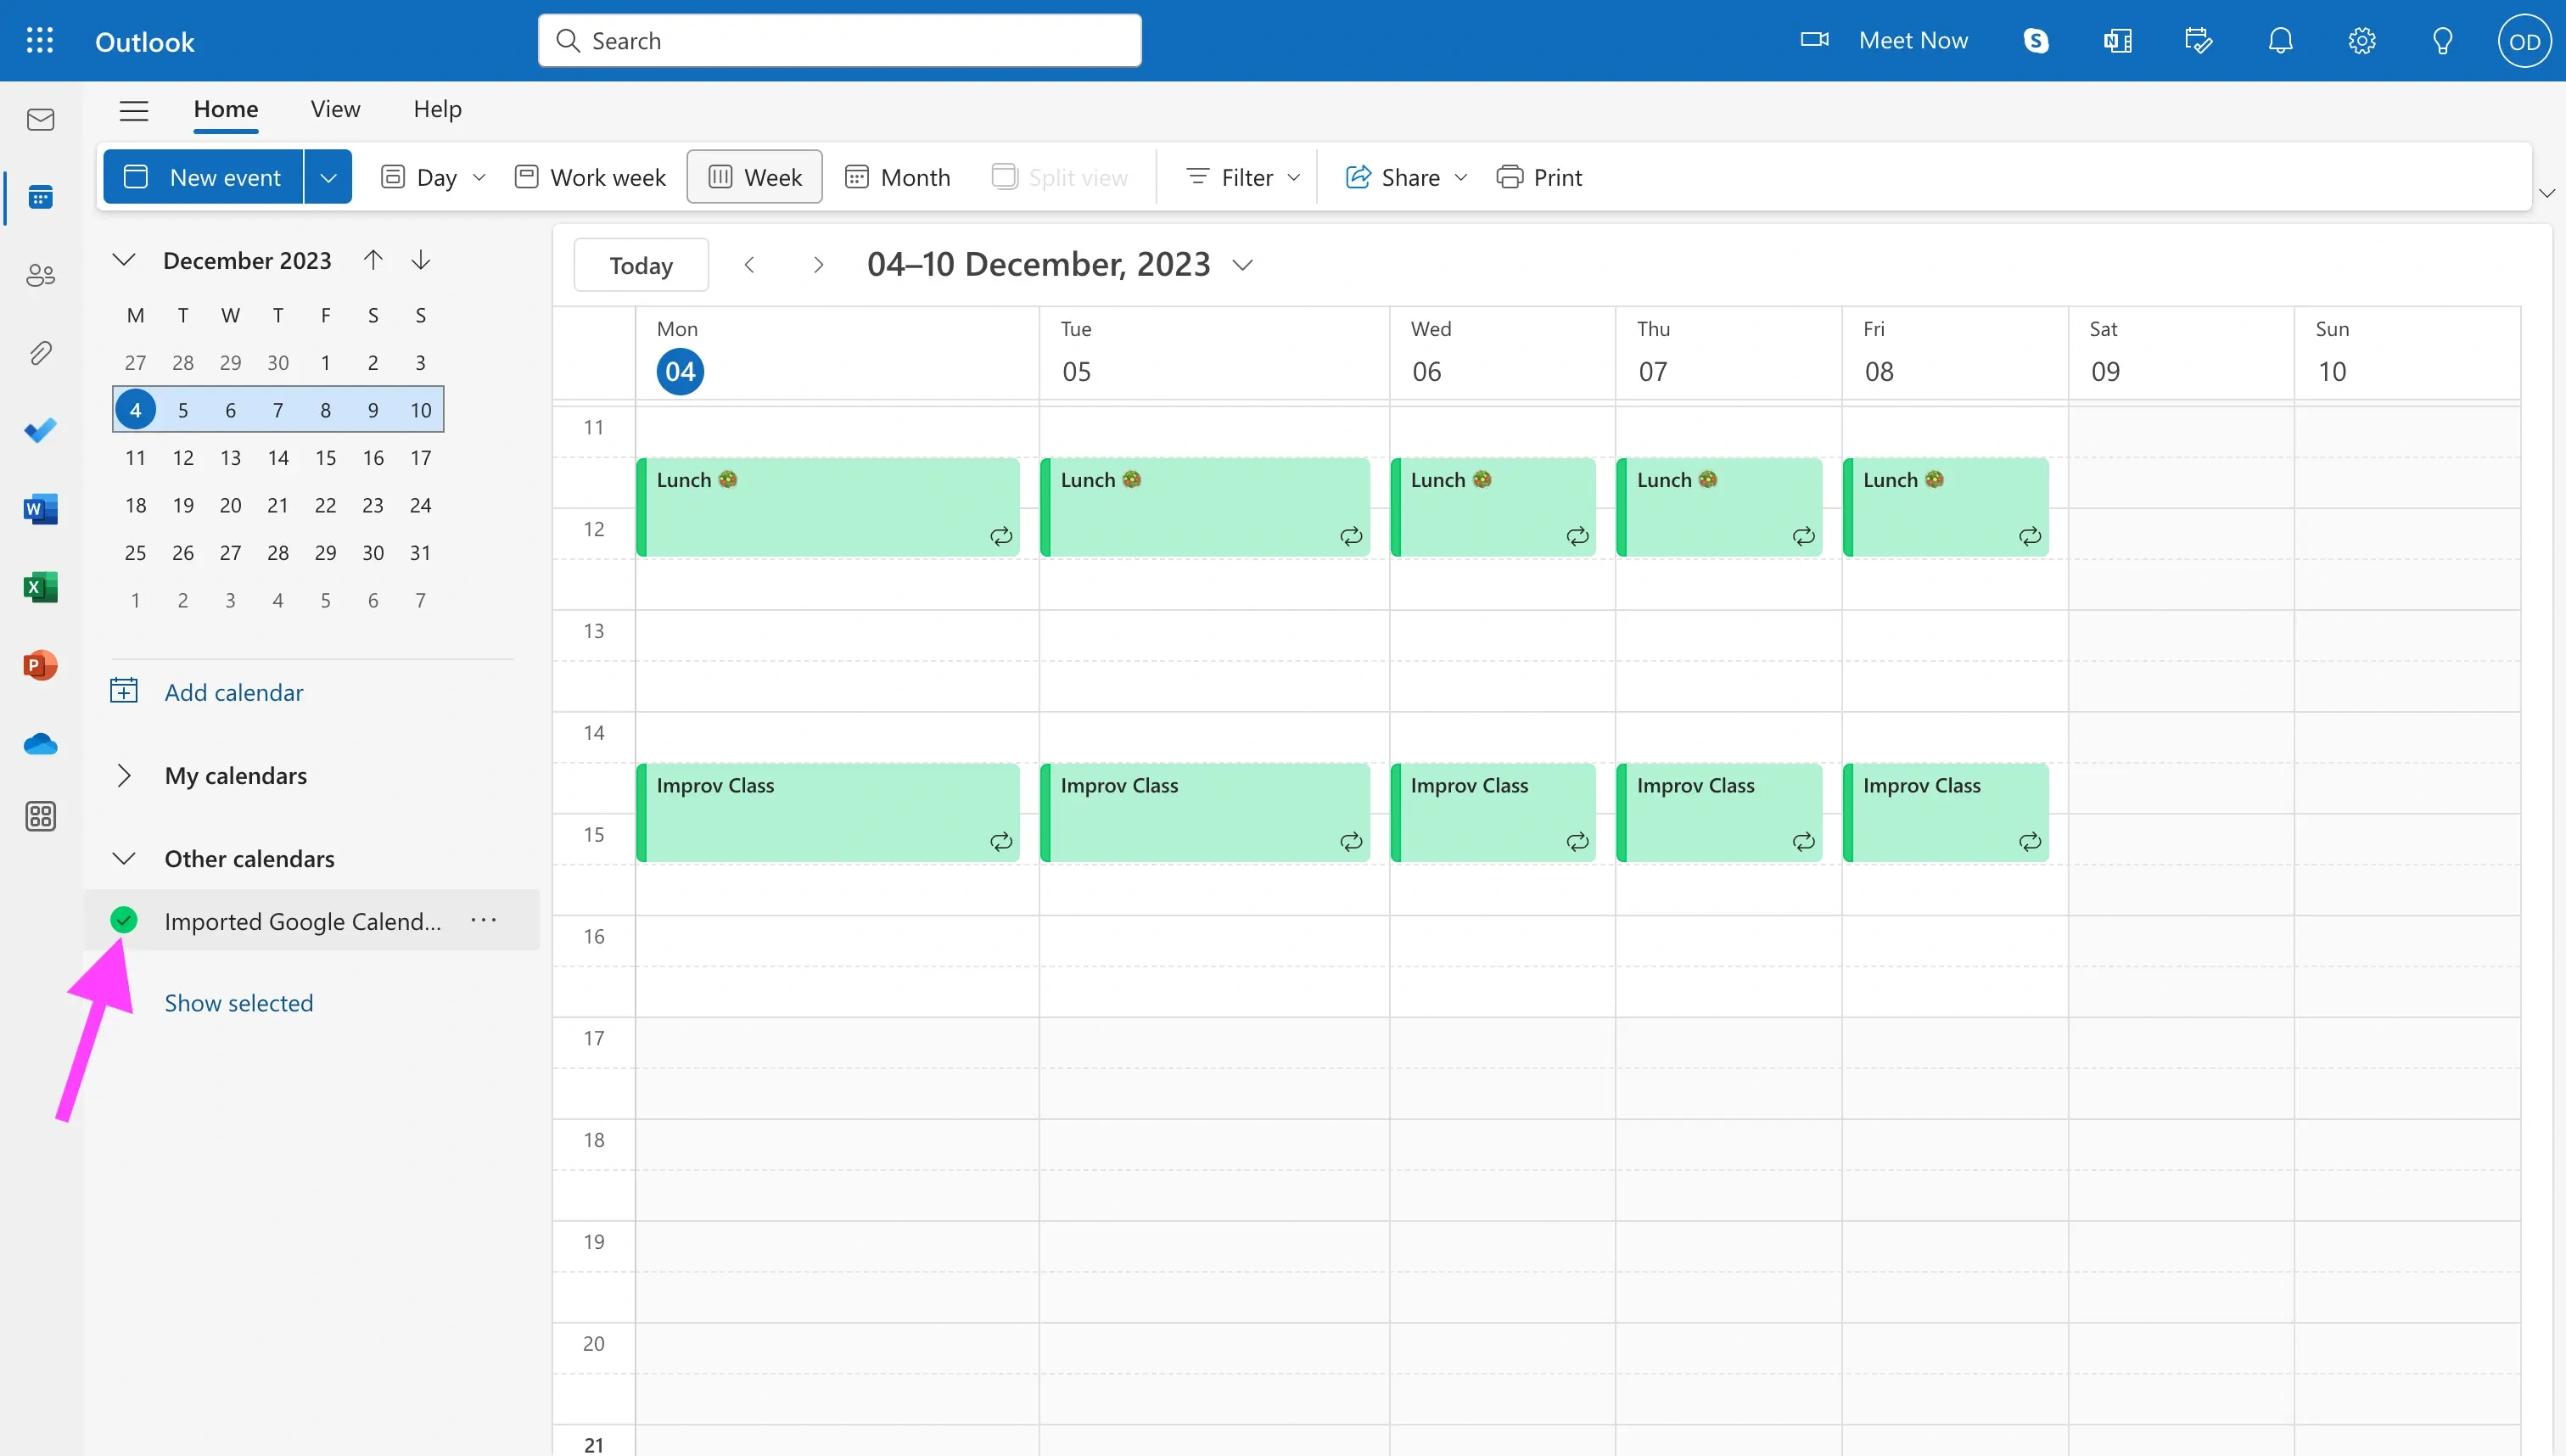 Outlook - Make sure the Calendar is checked (turned on)